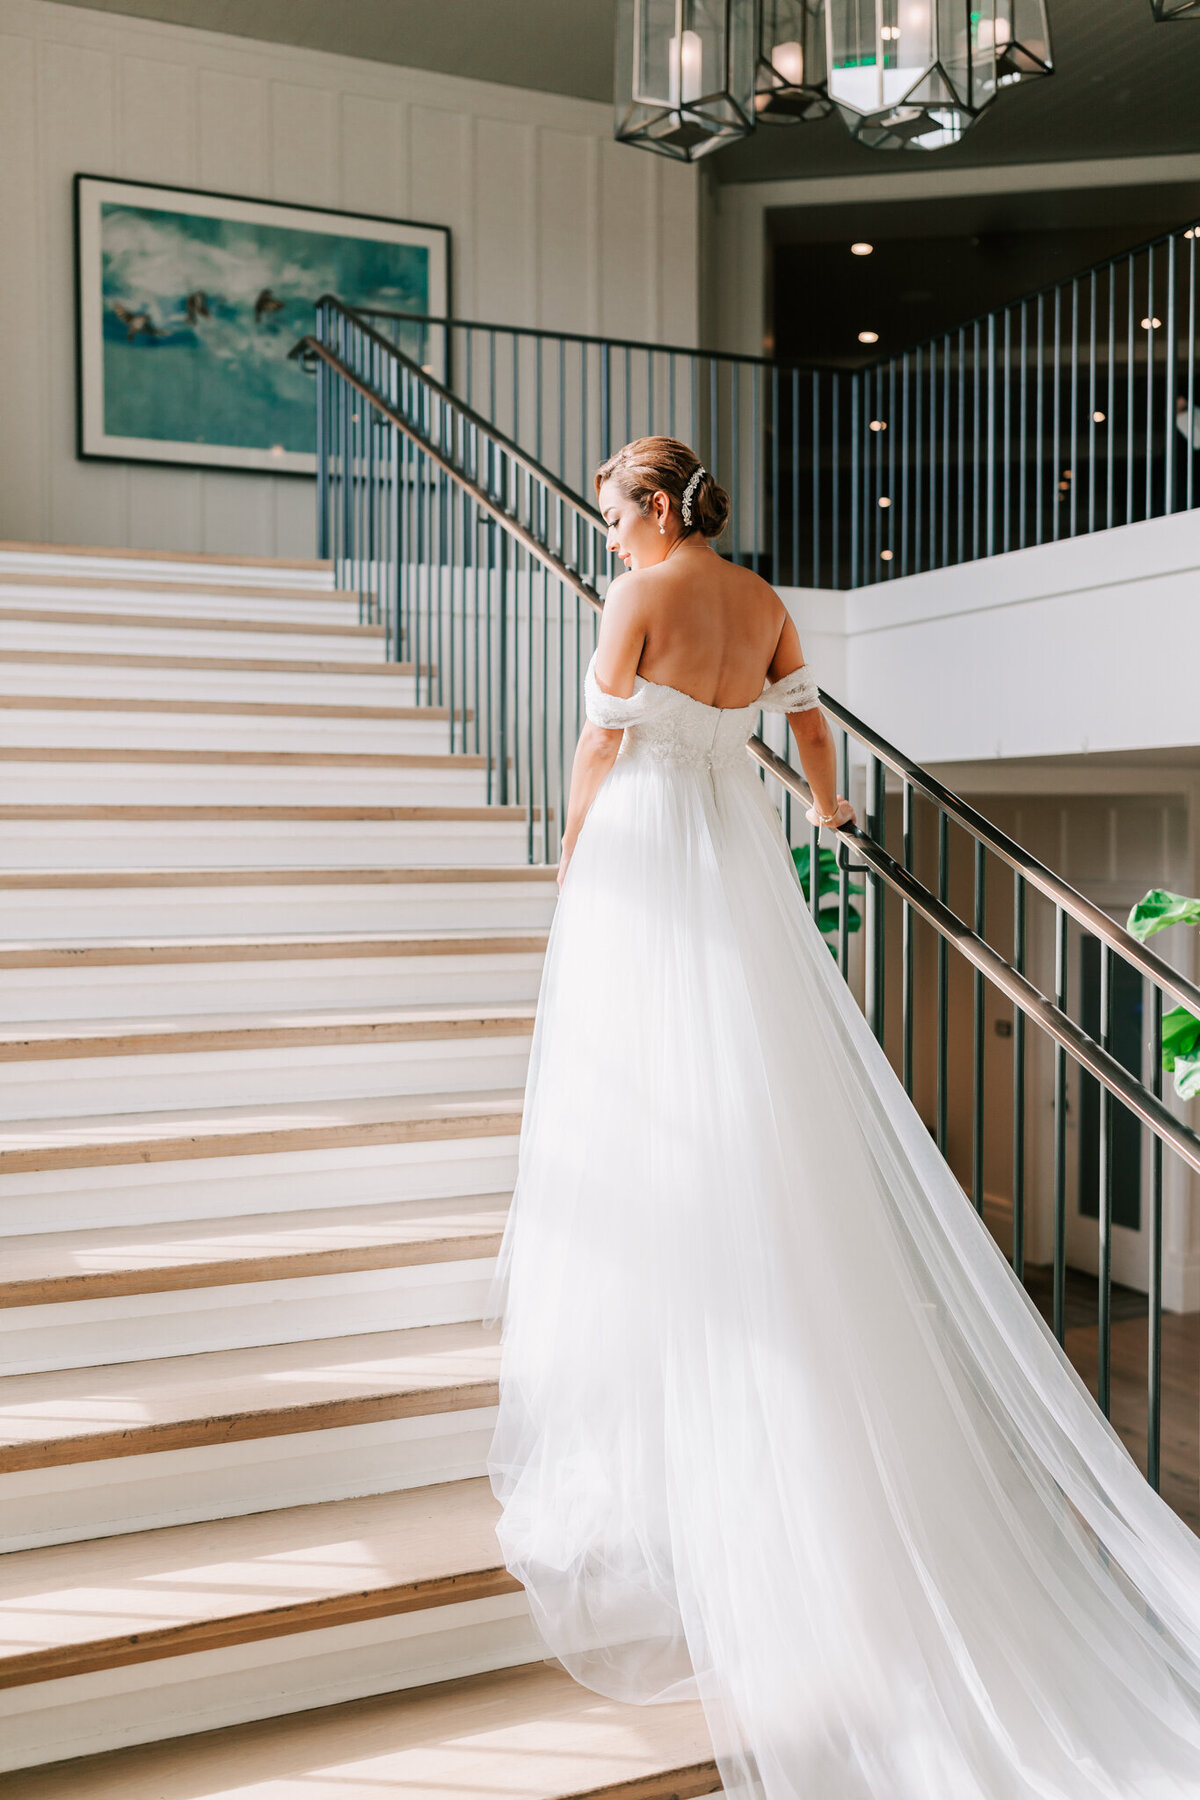 Ally's Wedding Photography | Houston (and Beyond)